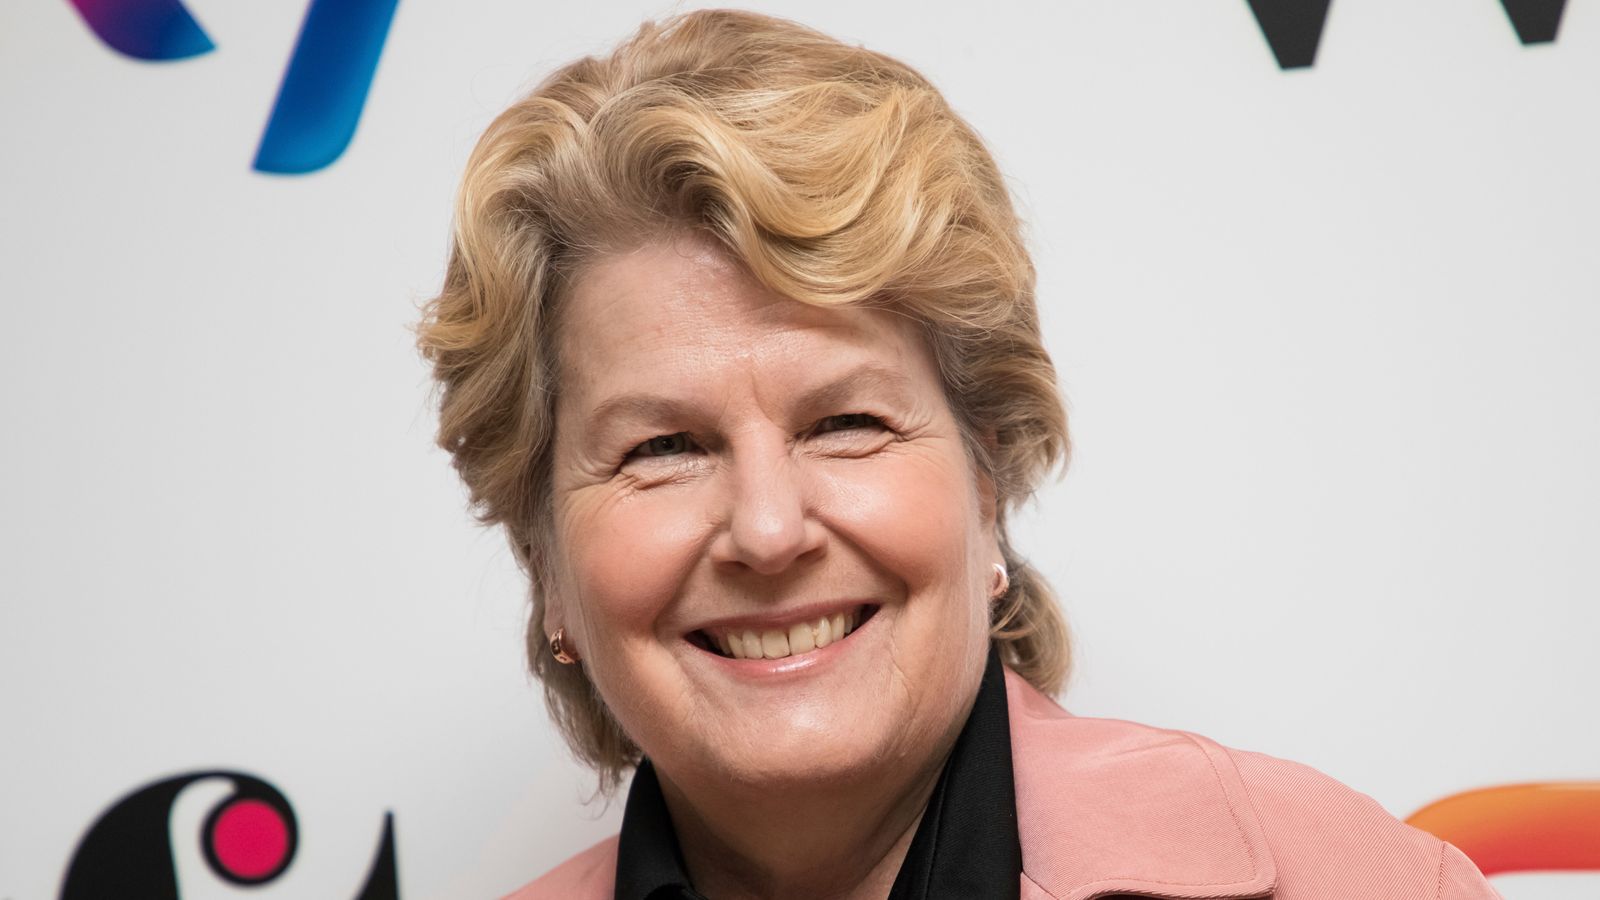 Comedian and former Great British Bake Off presenter Sandi Toksvig admitted to hospital in Australia